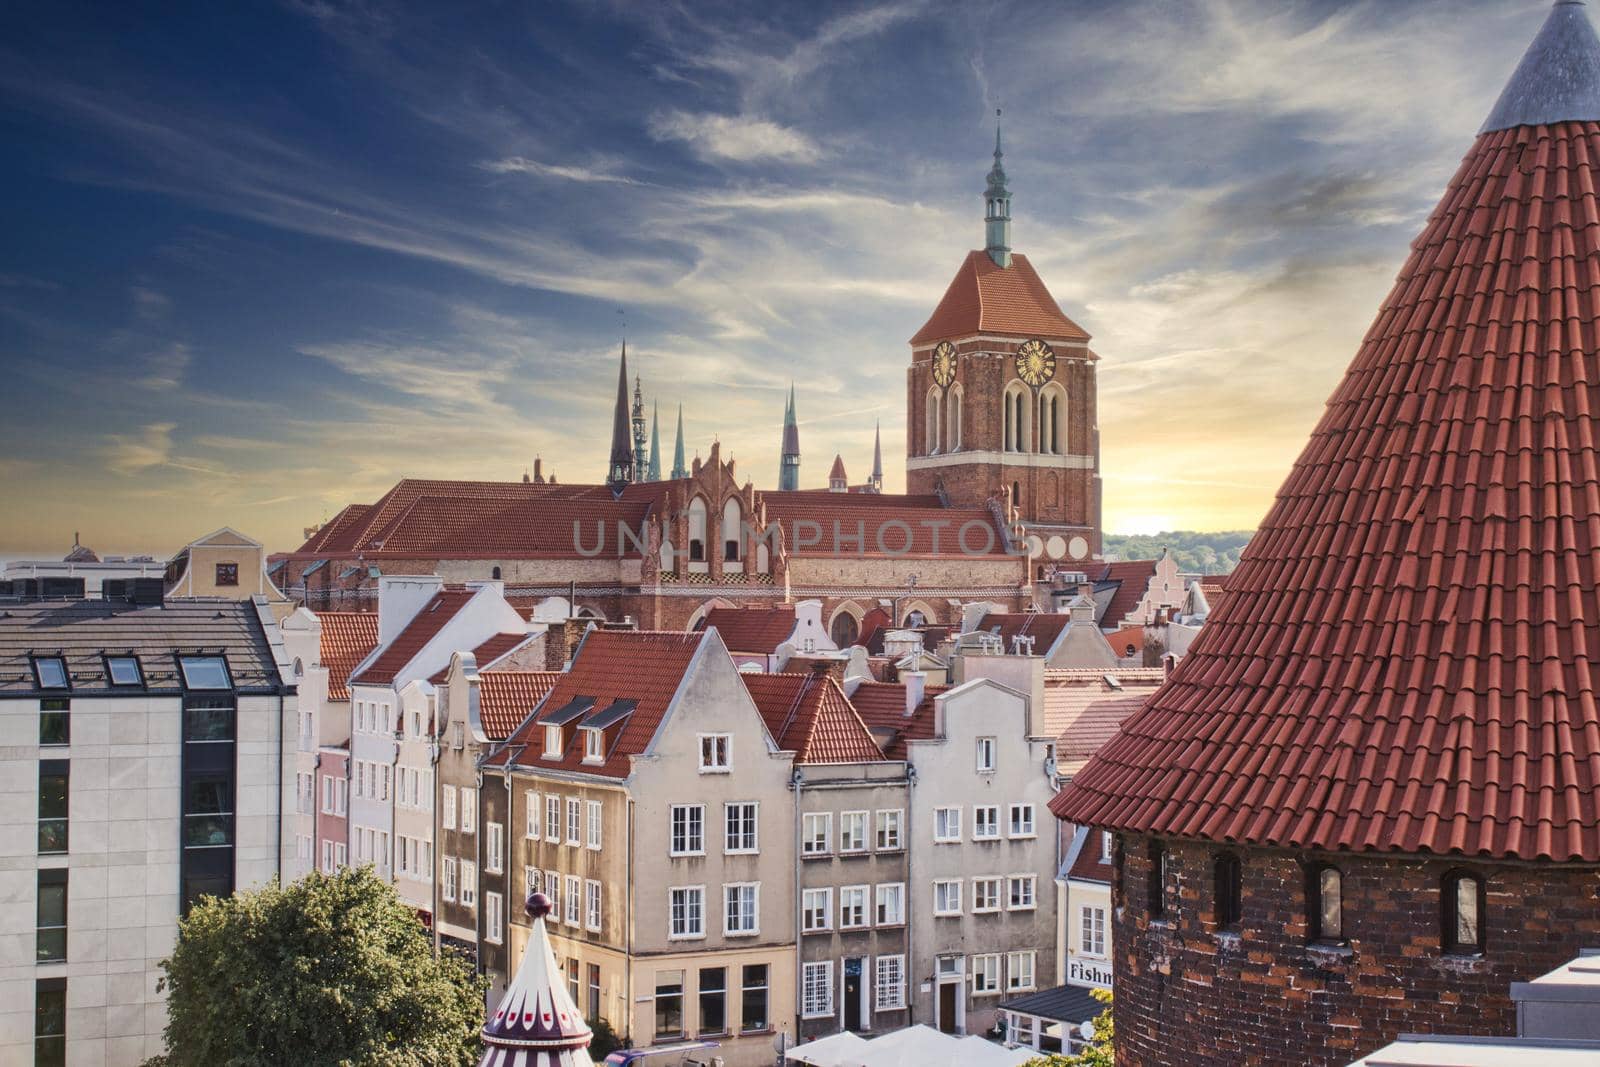 Aerial view of Gdansk city center with church clock tower in the distance